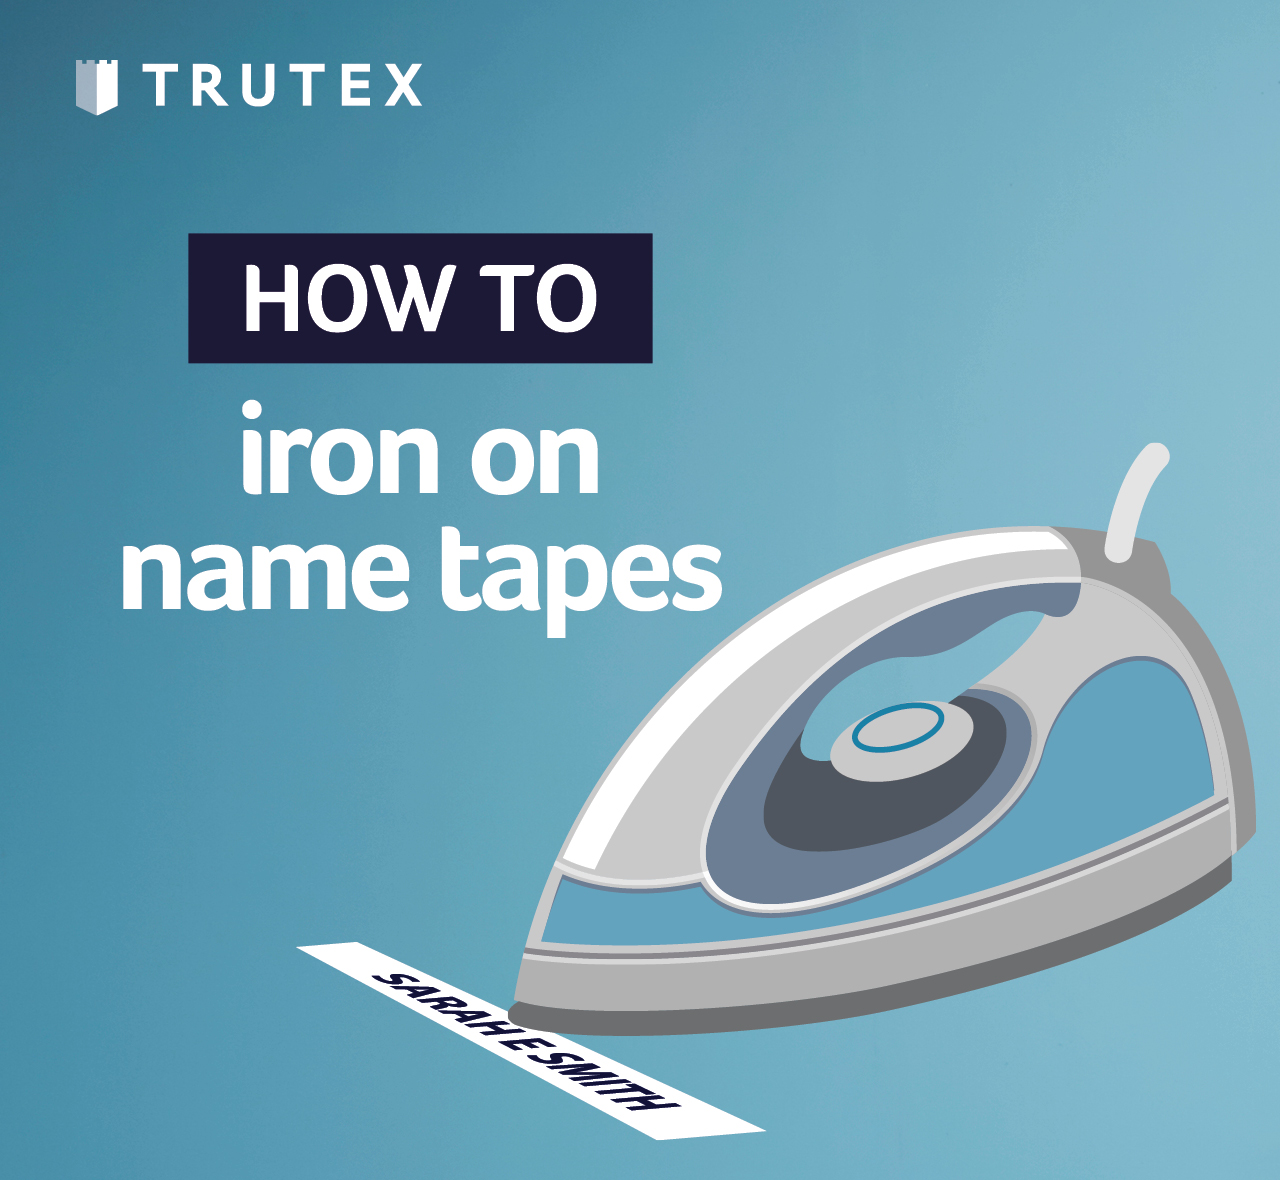 How to: iron on name tapes